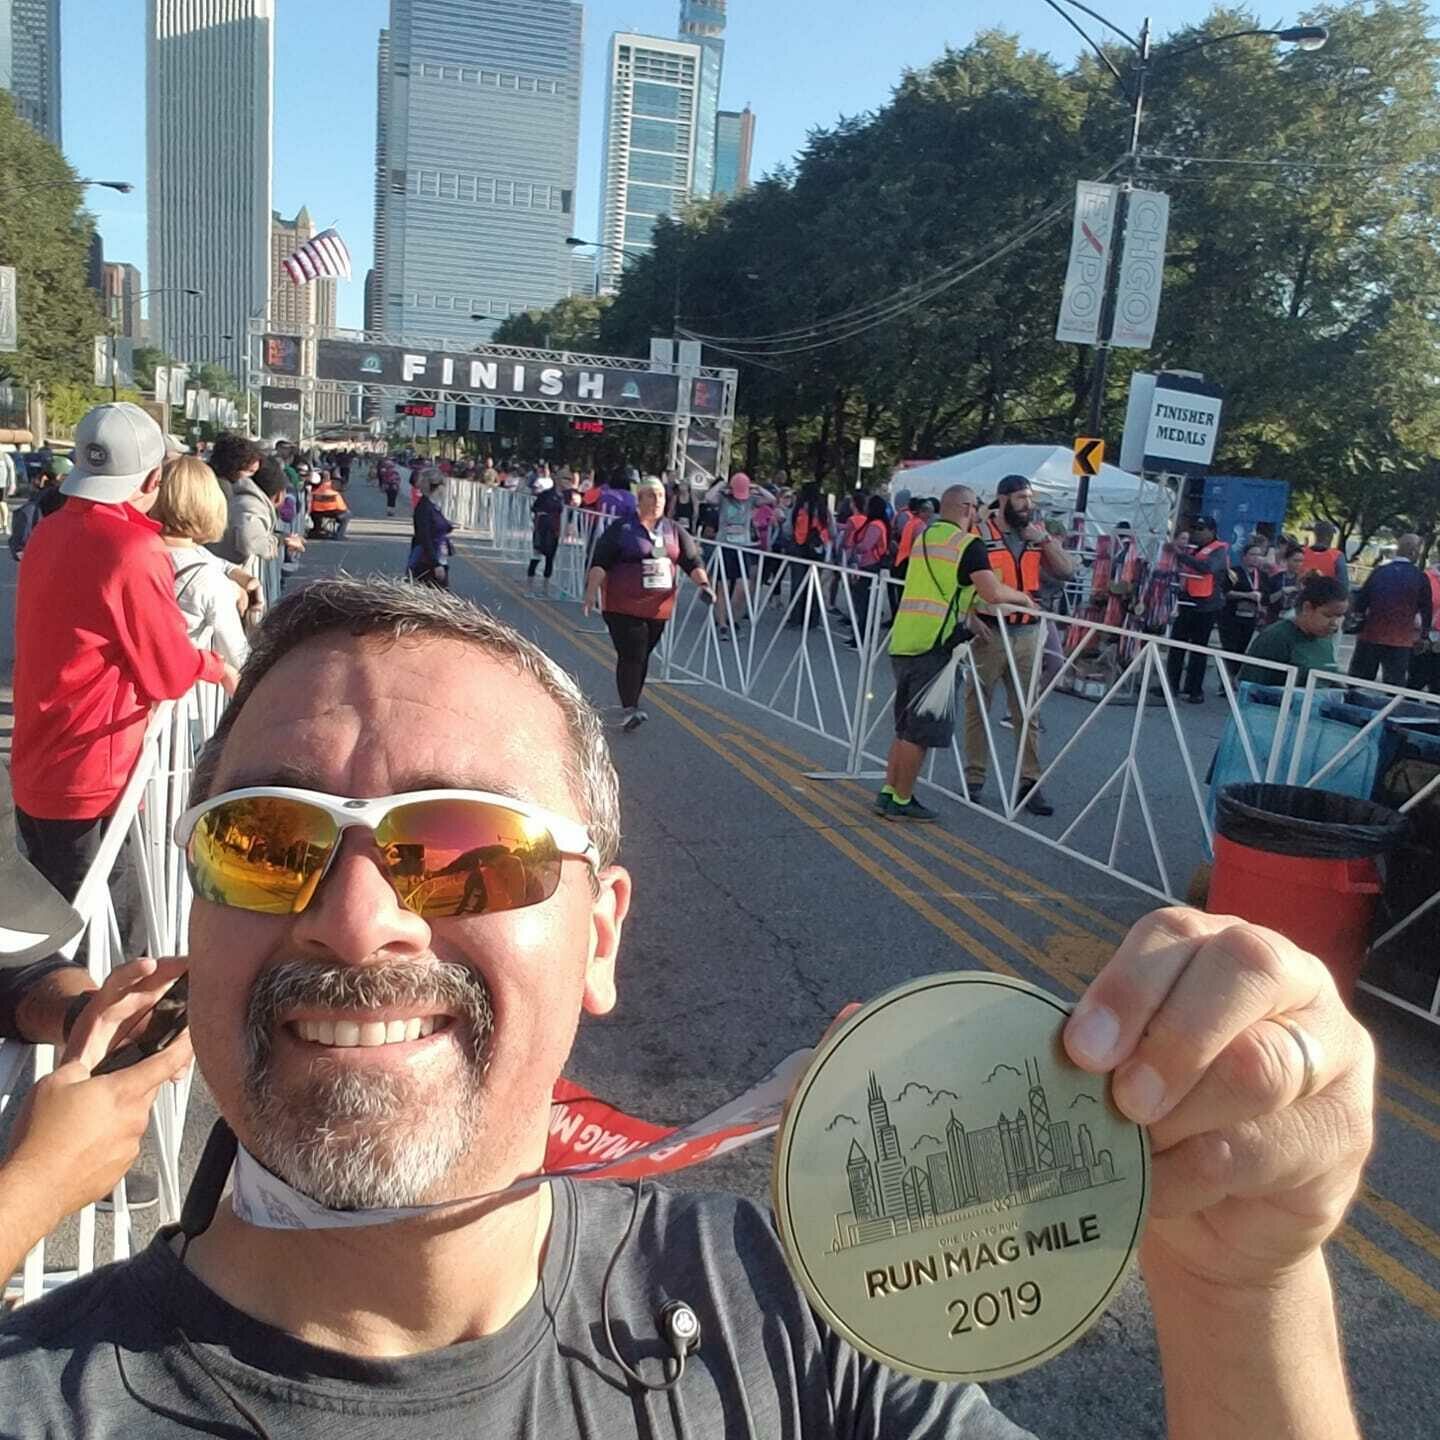 RUN Mag Mile 2019 Raises Nearly 7000 for CHI The Chicago Help Initiative